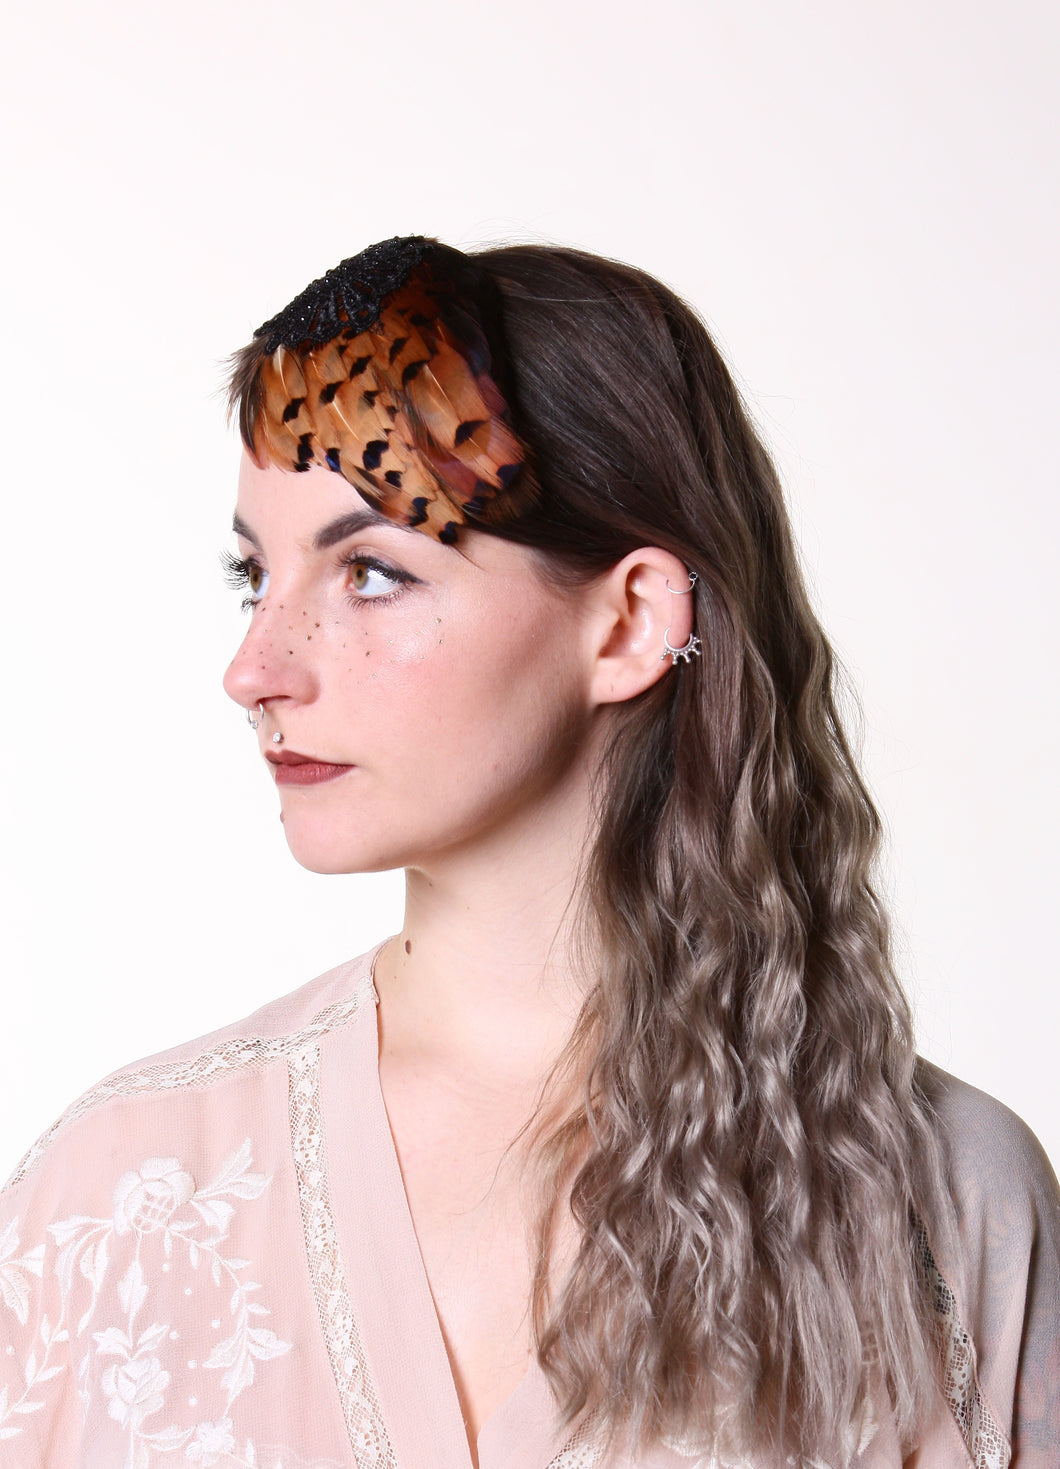 In Full Plume Amber feathered headpiece, fascinator or statement hair accessory